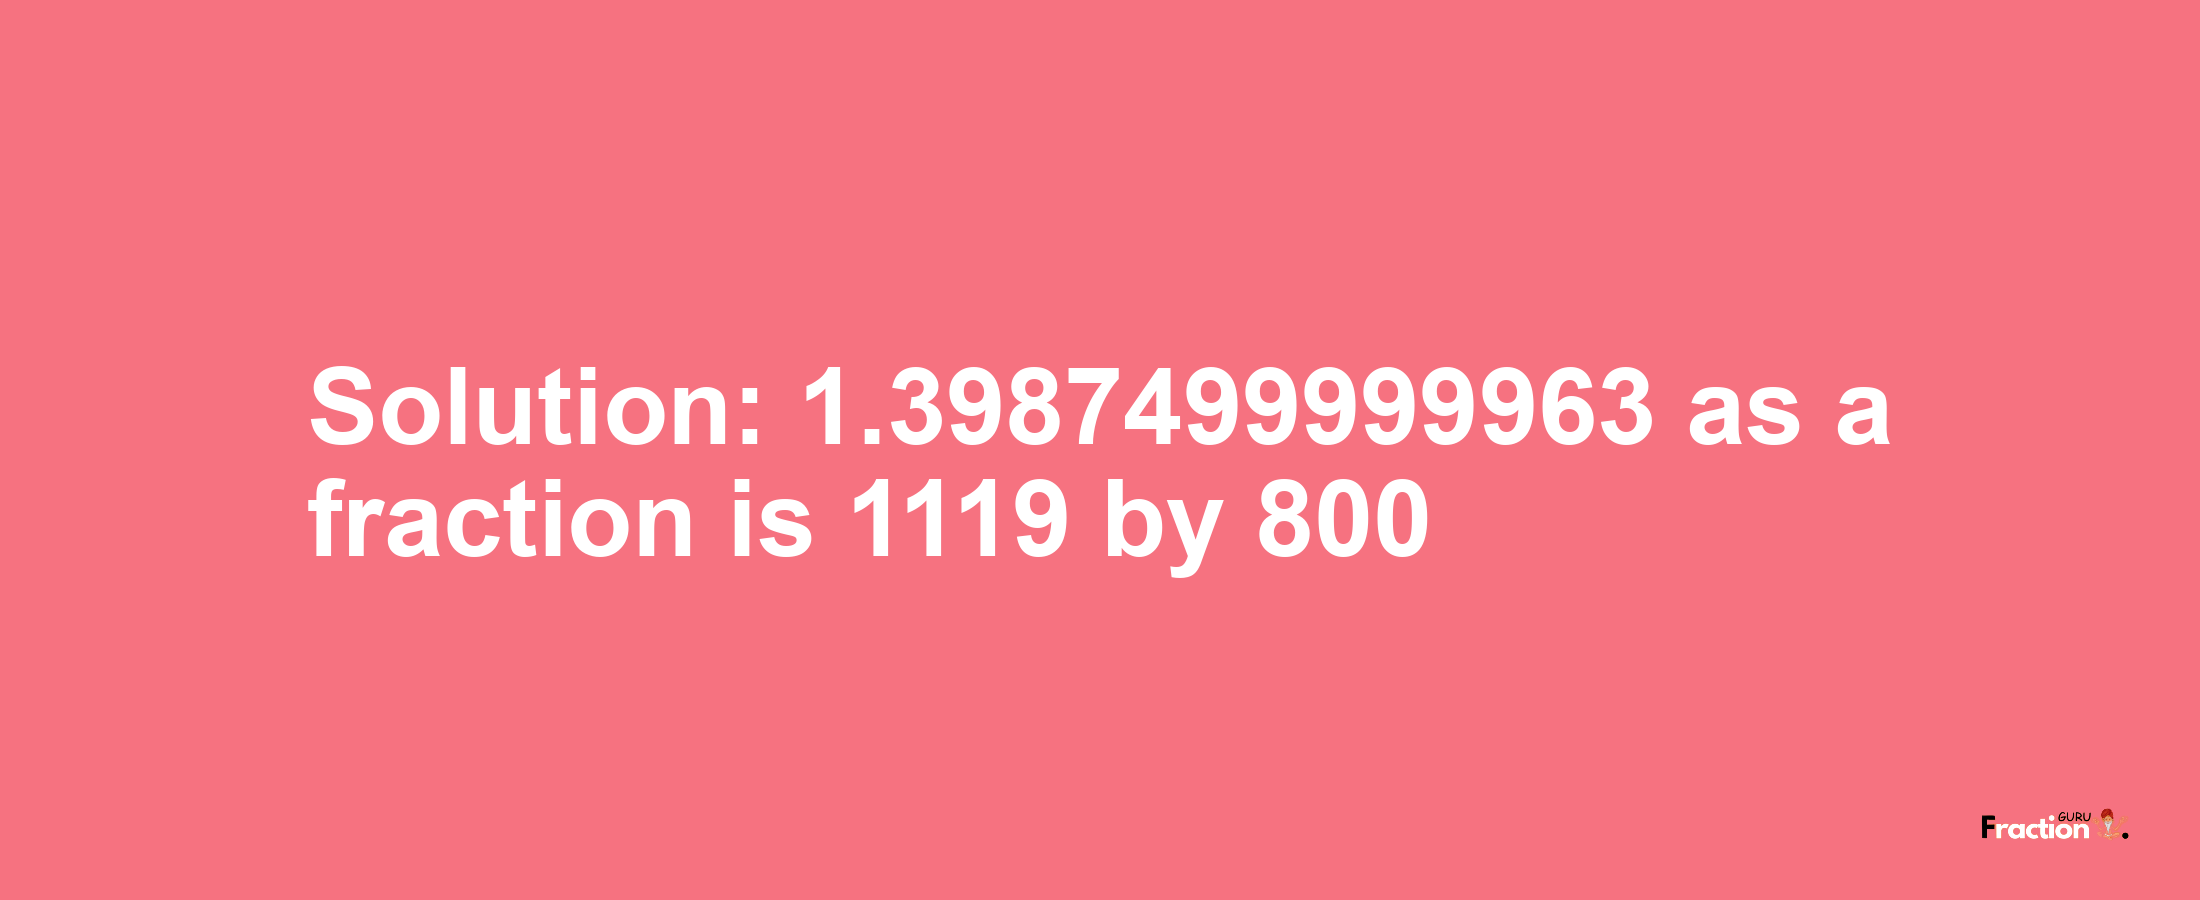 Solution:1.3987499999963 as a fraction is 1119/800